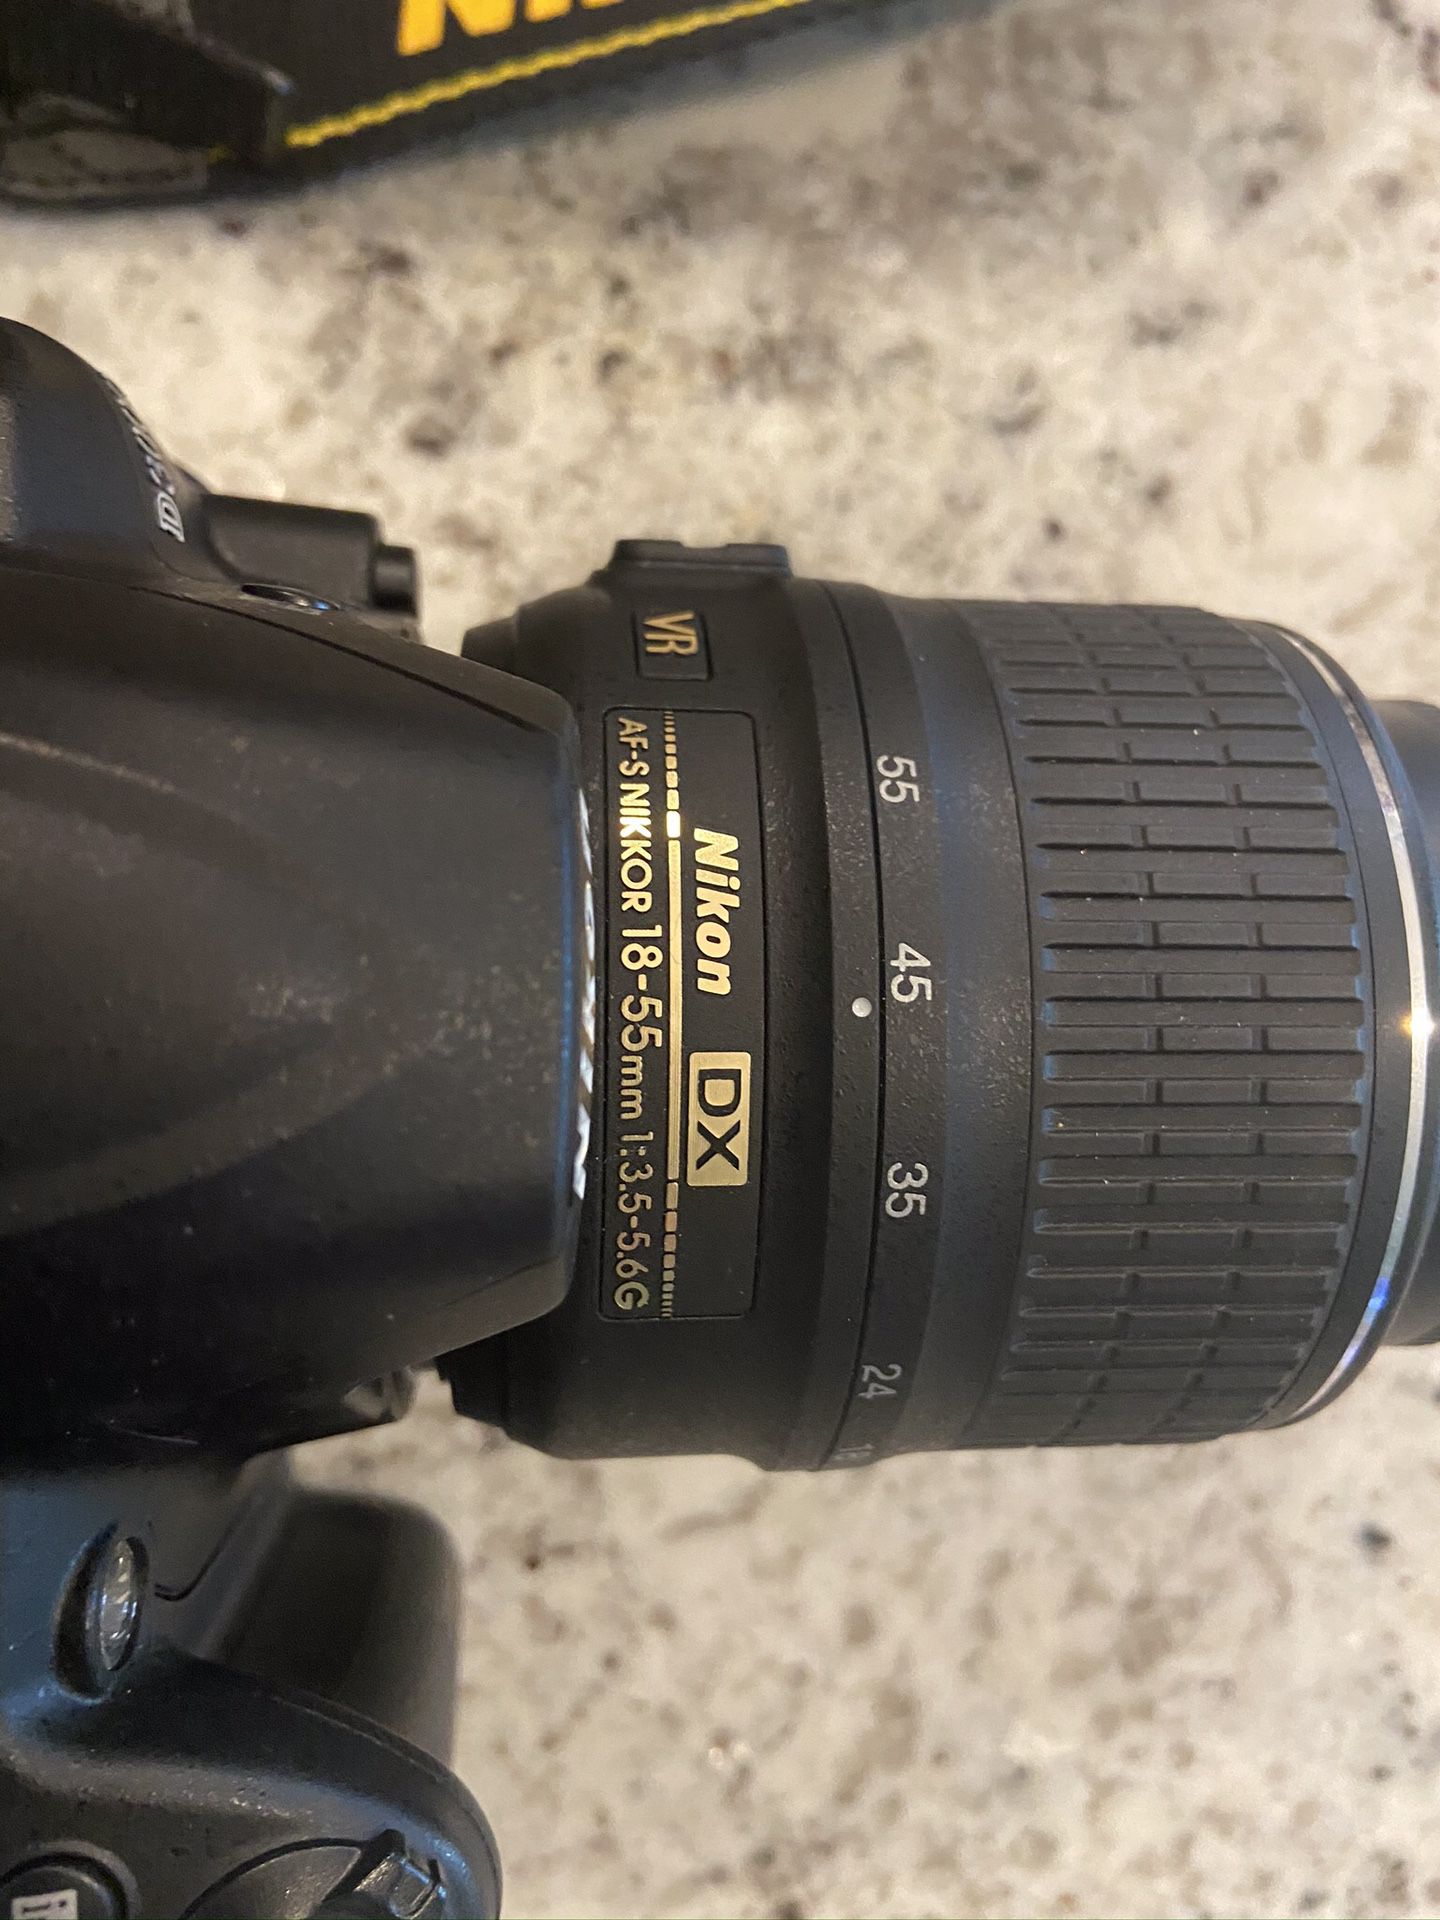 Nikon D3000 Camera with carrying bag. Includes camera battery, lens, charger, usb tracer wire and original documentation and software. Local pickup o